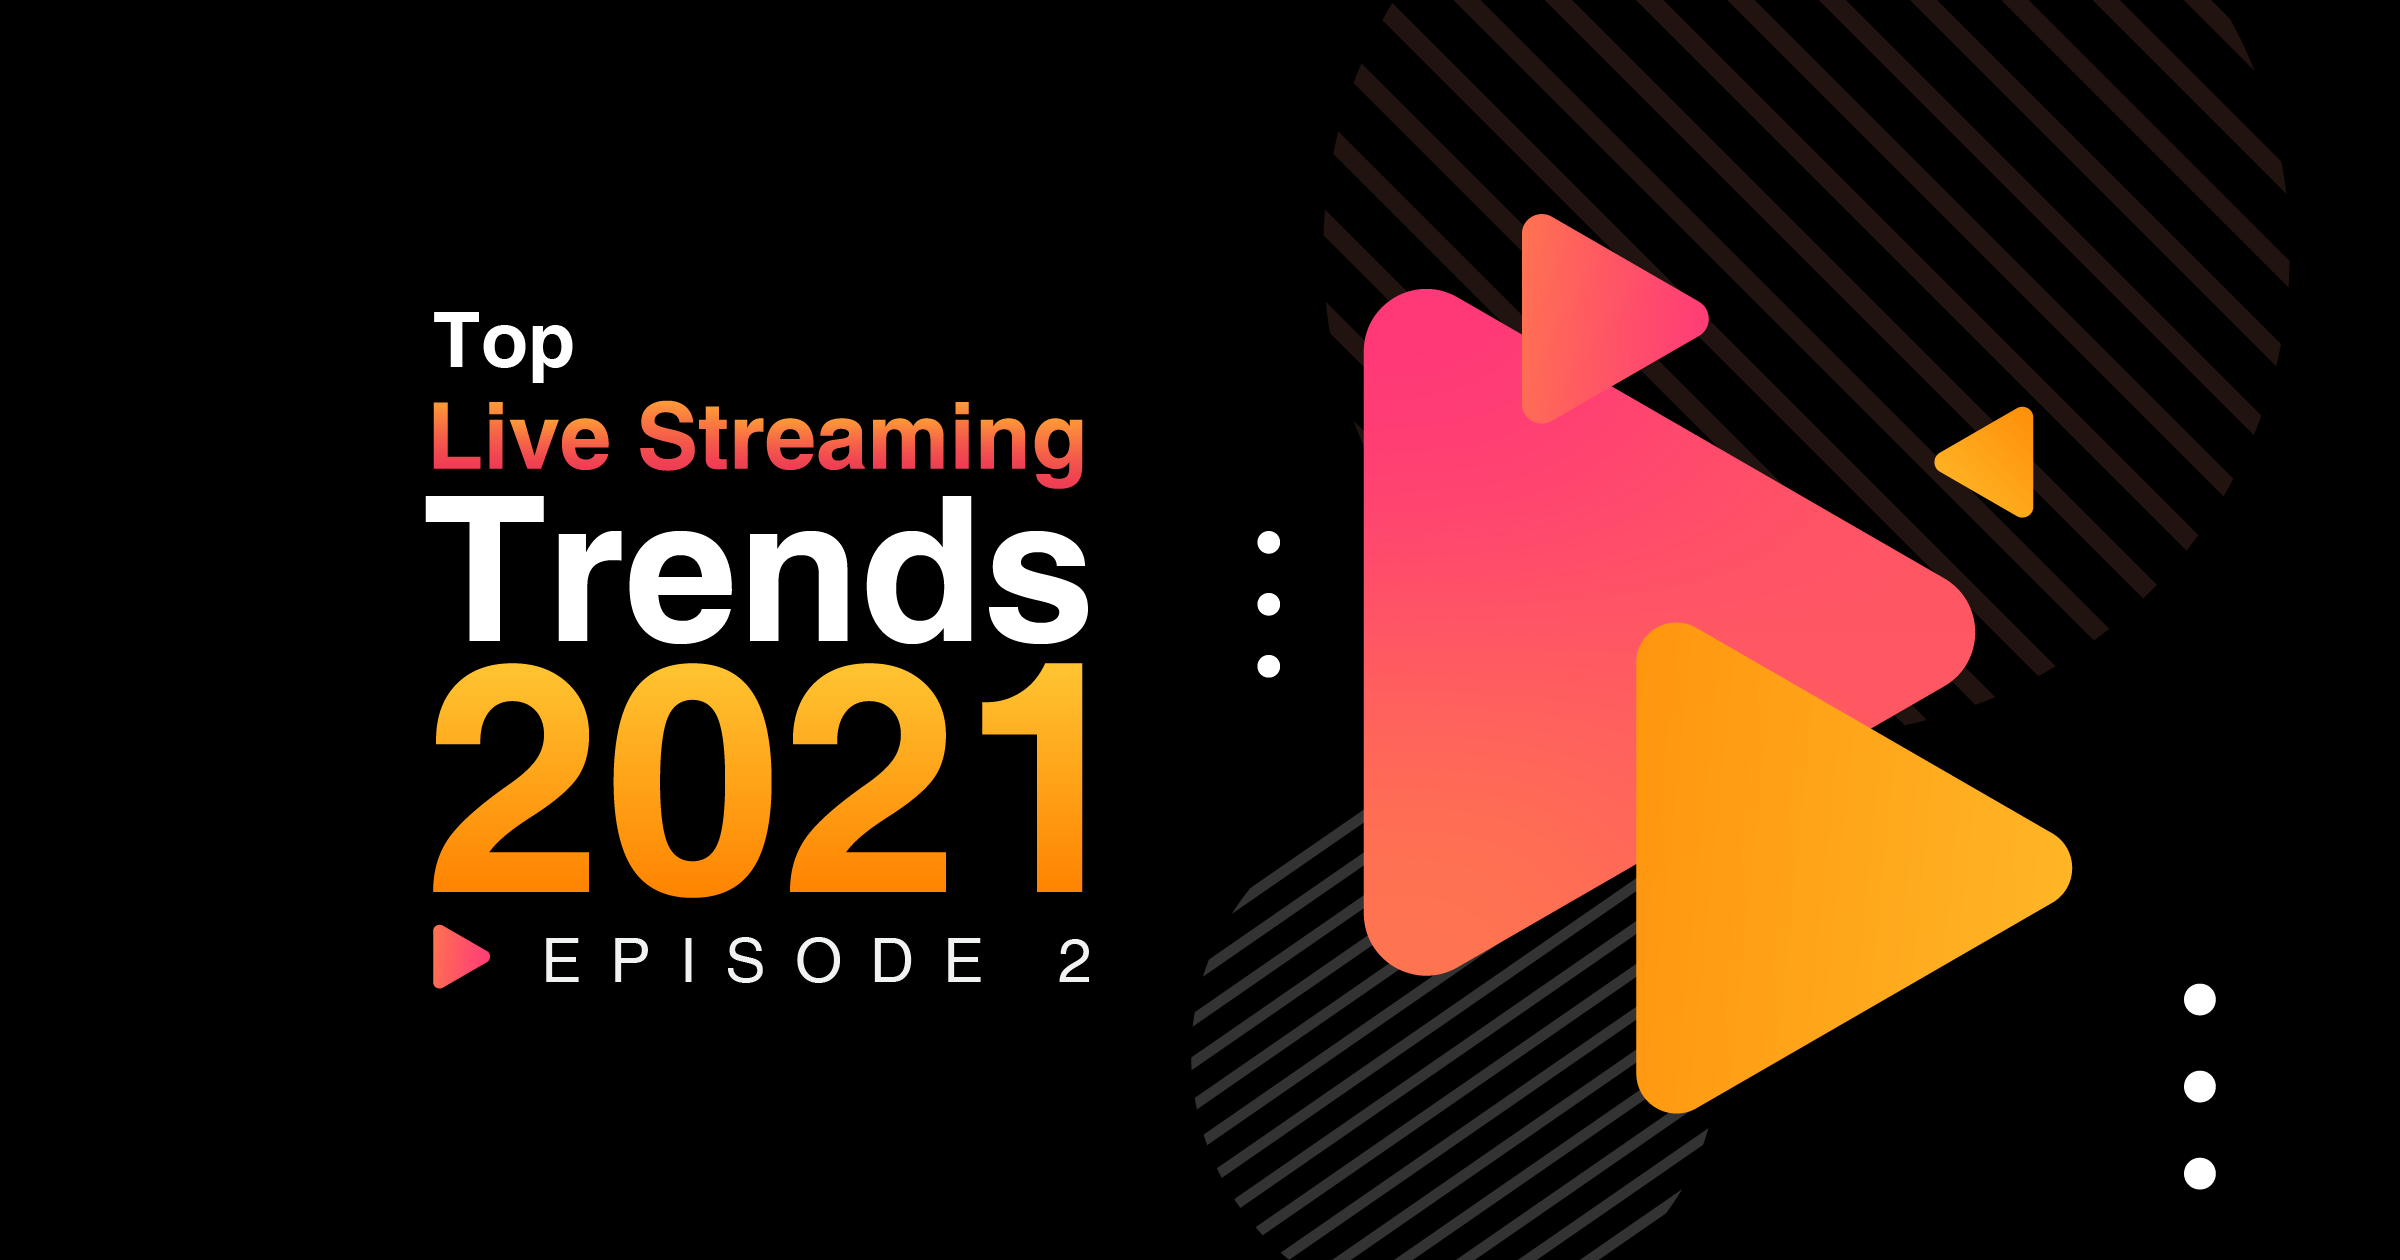 Top Live Streaming Trends 2021 - Episode 2